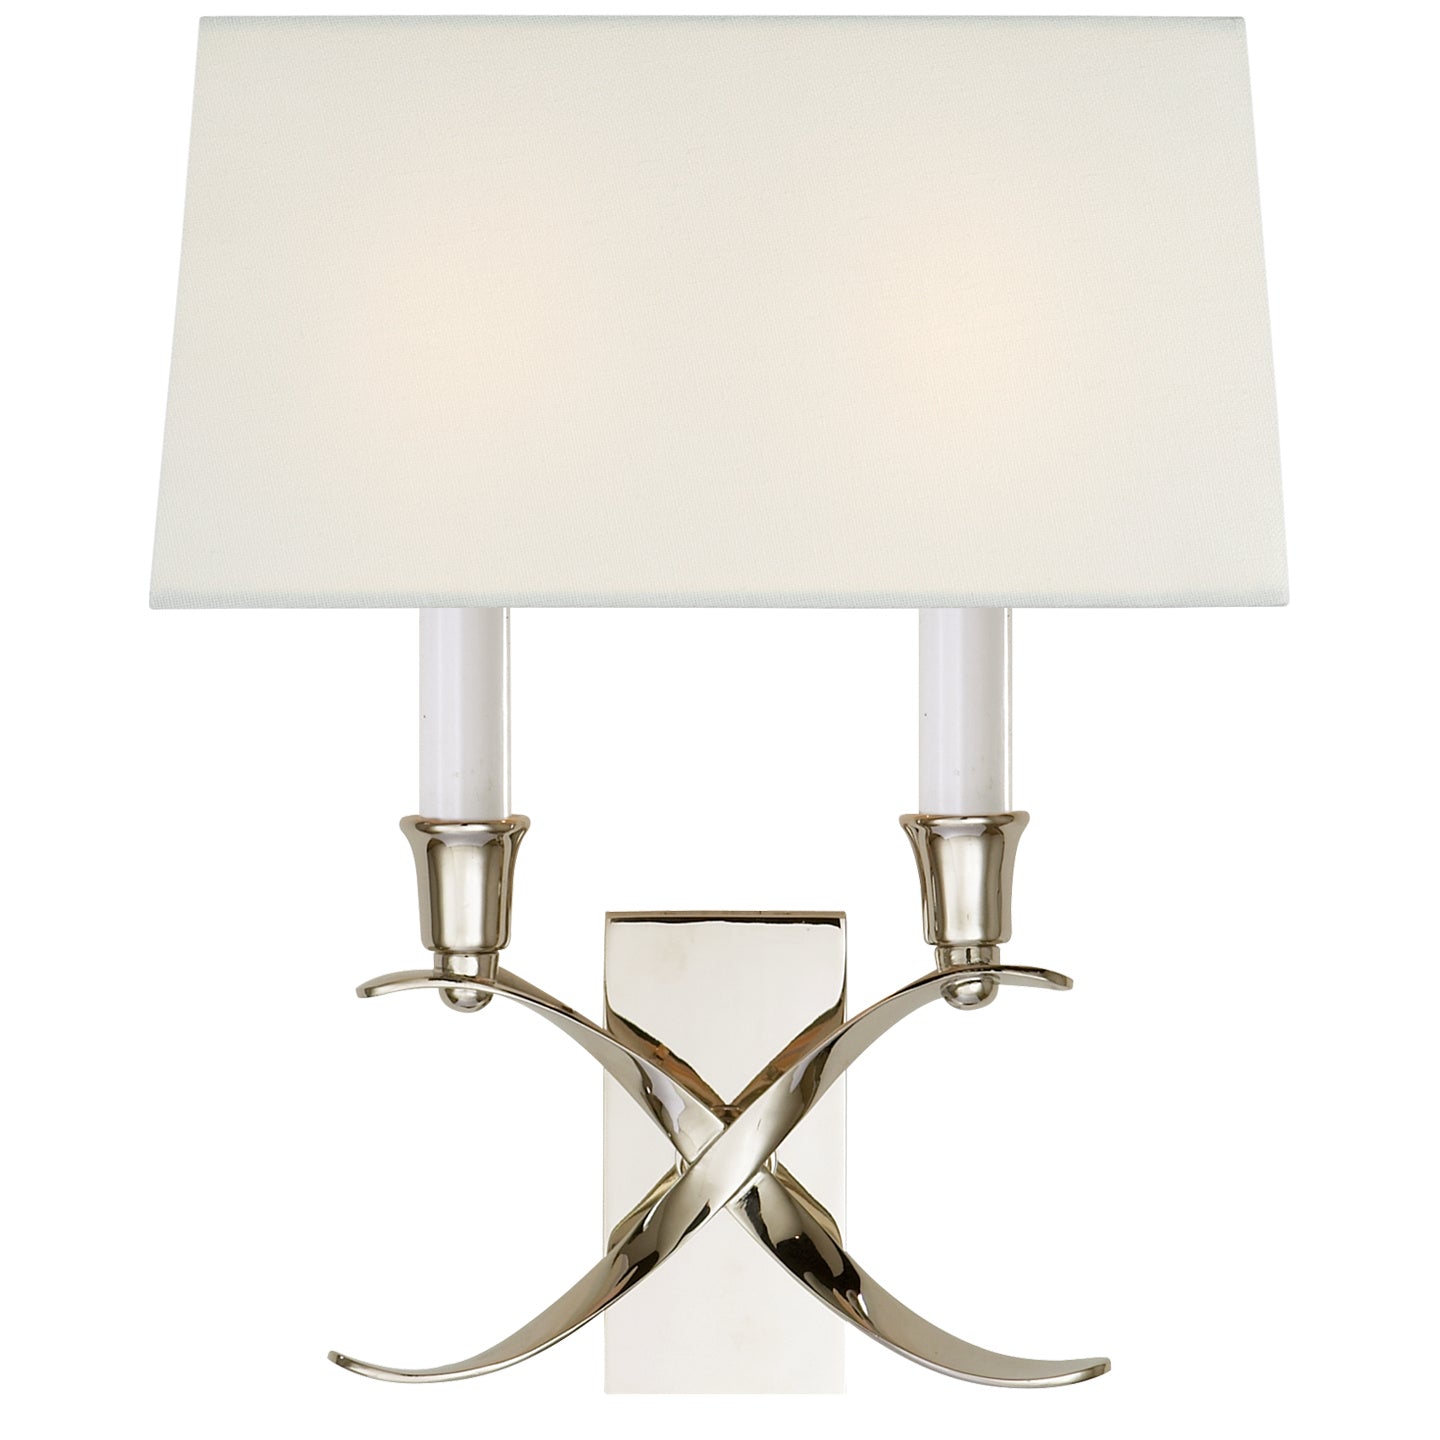 Load image into Gallery viewer, Visual Comfort Signature - CHD 1190PN-L - Two Light Wall Sconce - Cross Bouillotte - Polished Nickel
